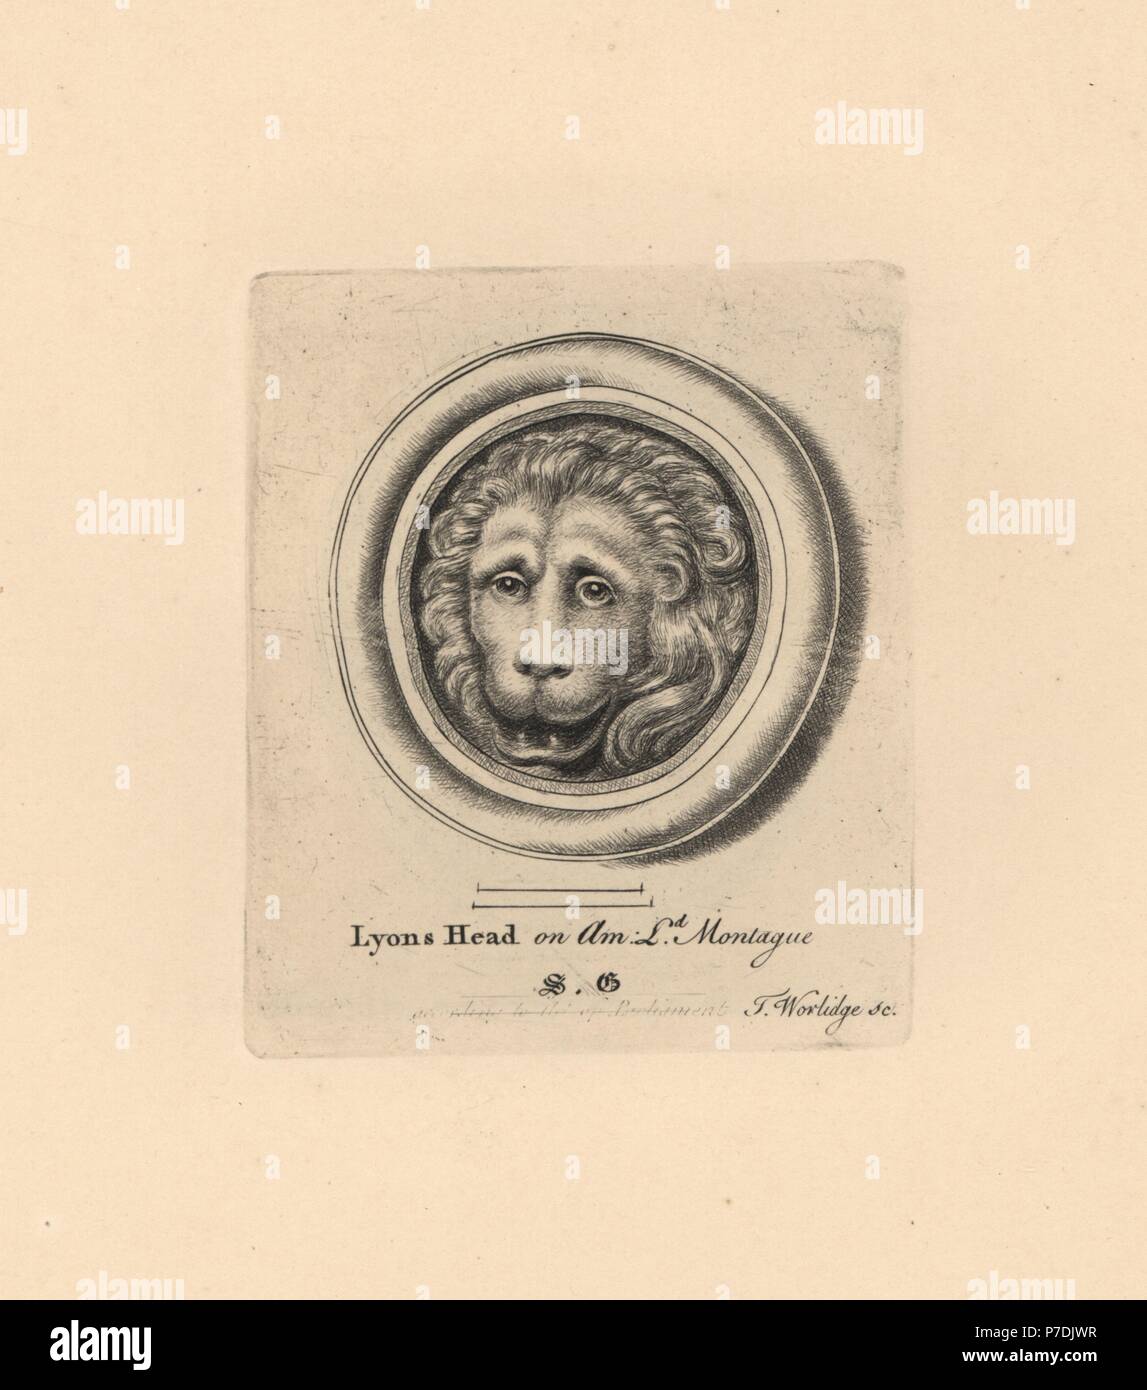 Portrait of a lion's head, on amethyst in Lord Montague's collection. Copperplate engraving by Thomas Worlidge from James Vallentin's One Hundred and Eight Engravings from Antique Gems, 1863. Stock Photo